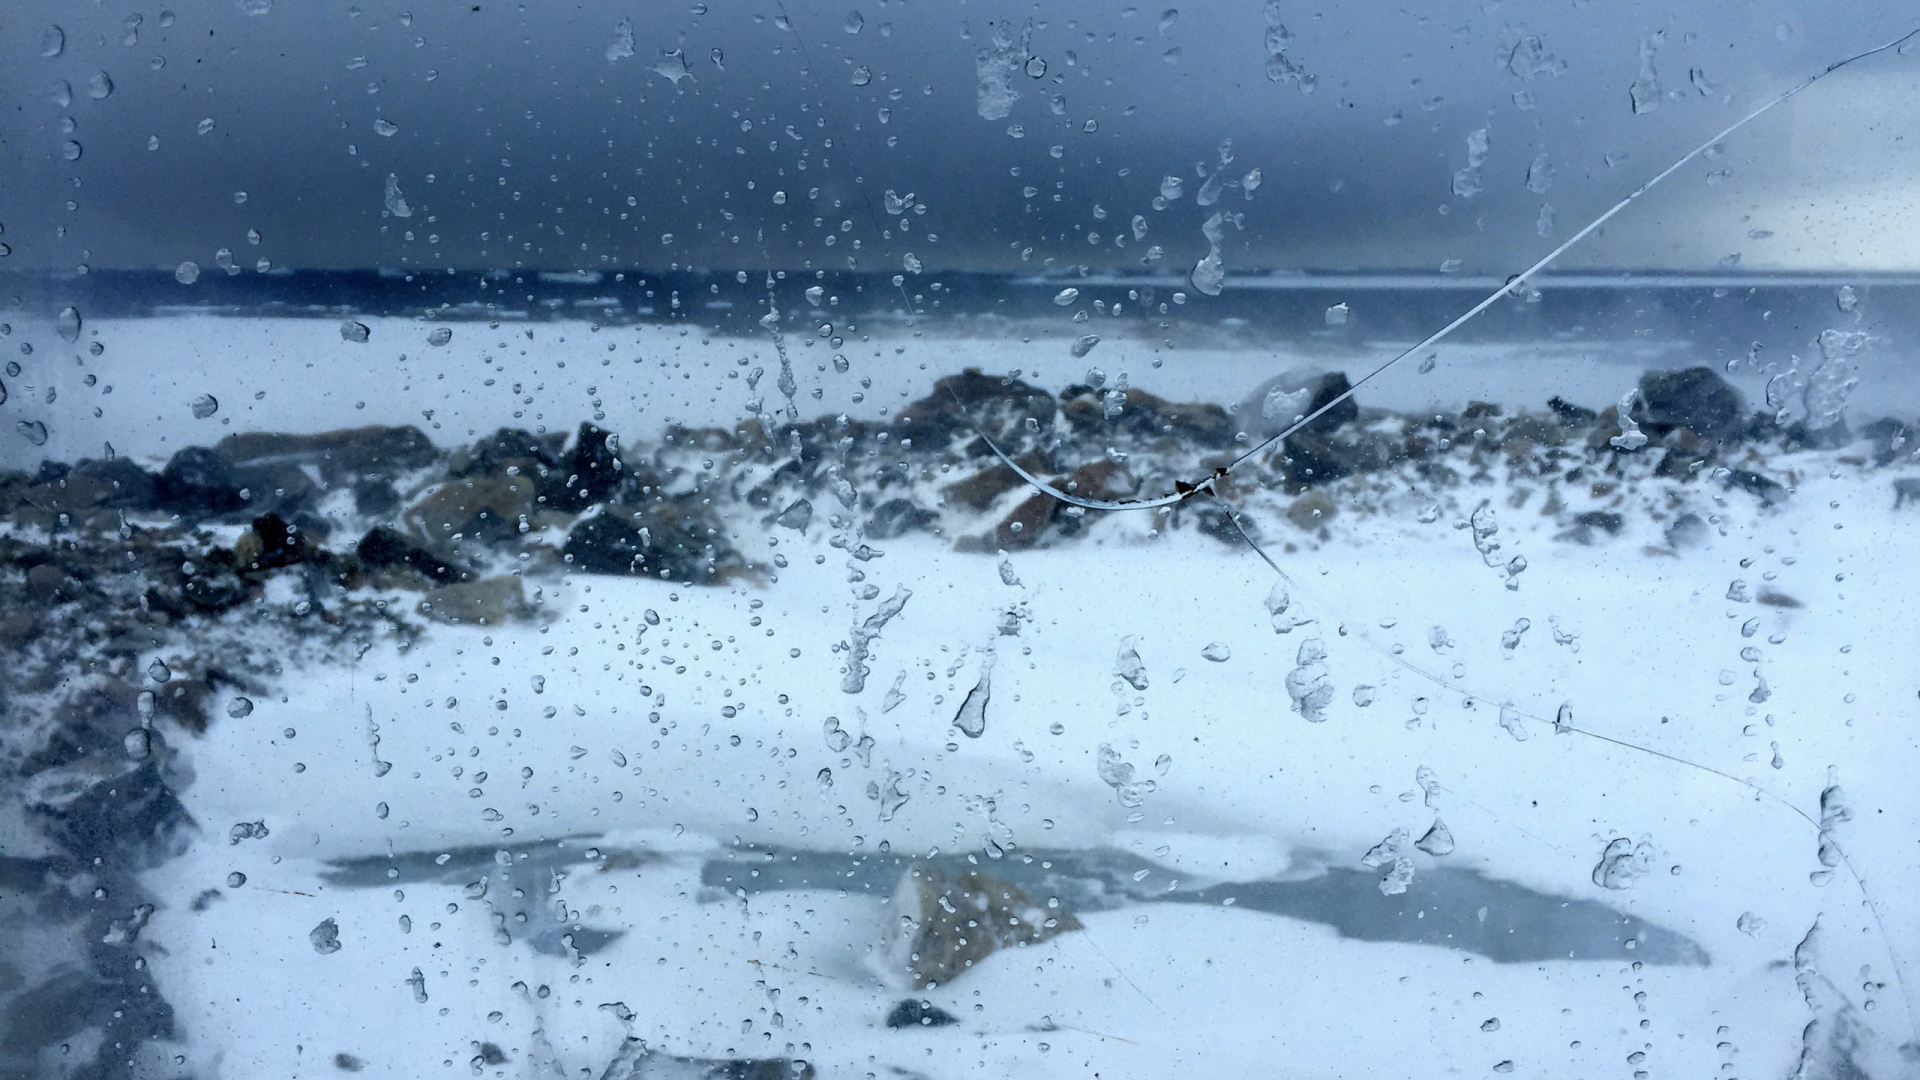 View of ice and rocks through a window spattered with rain drops